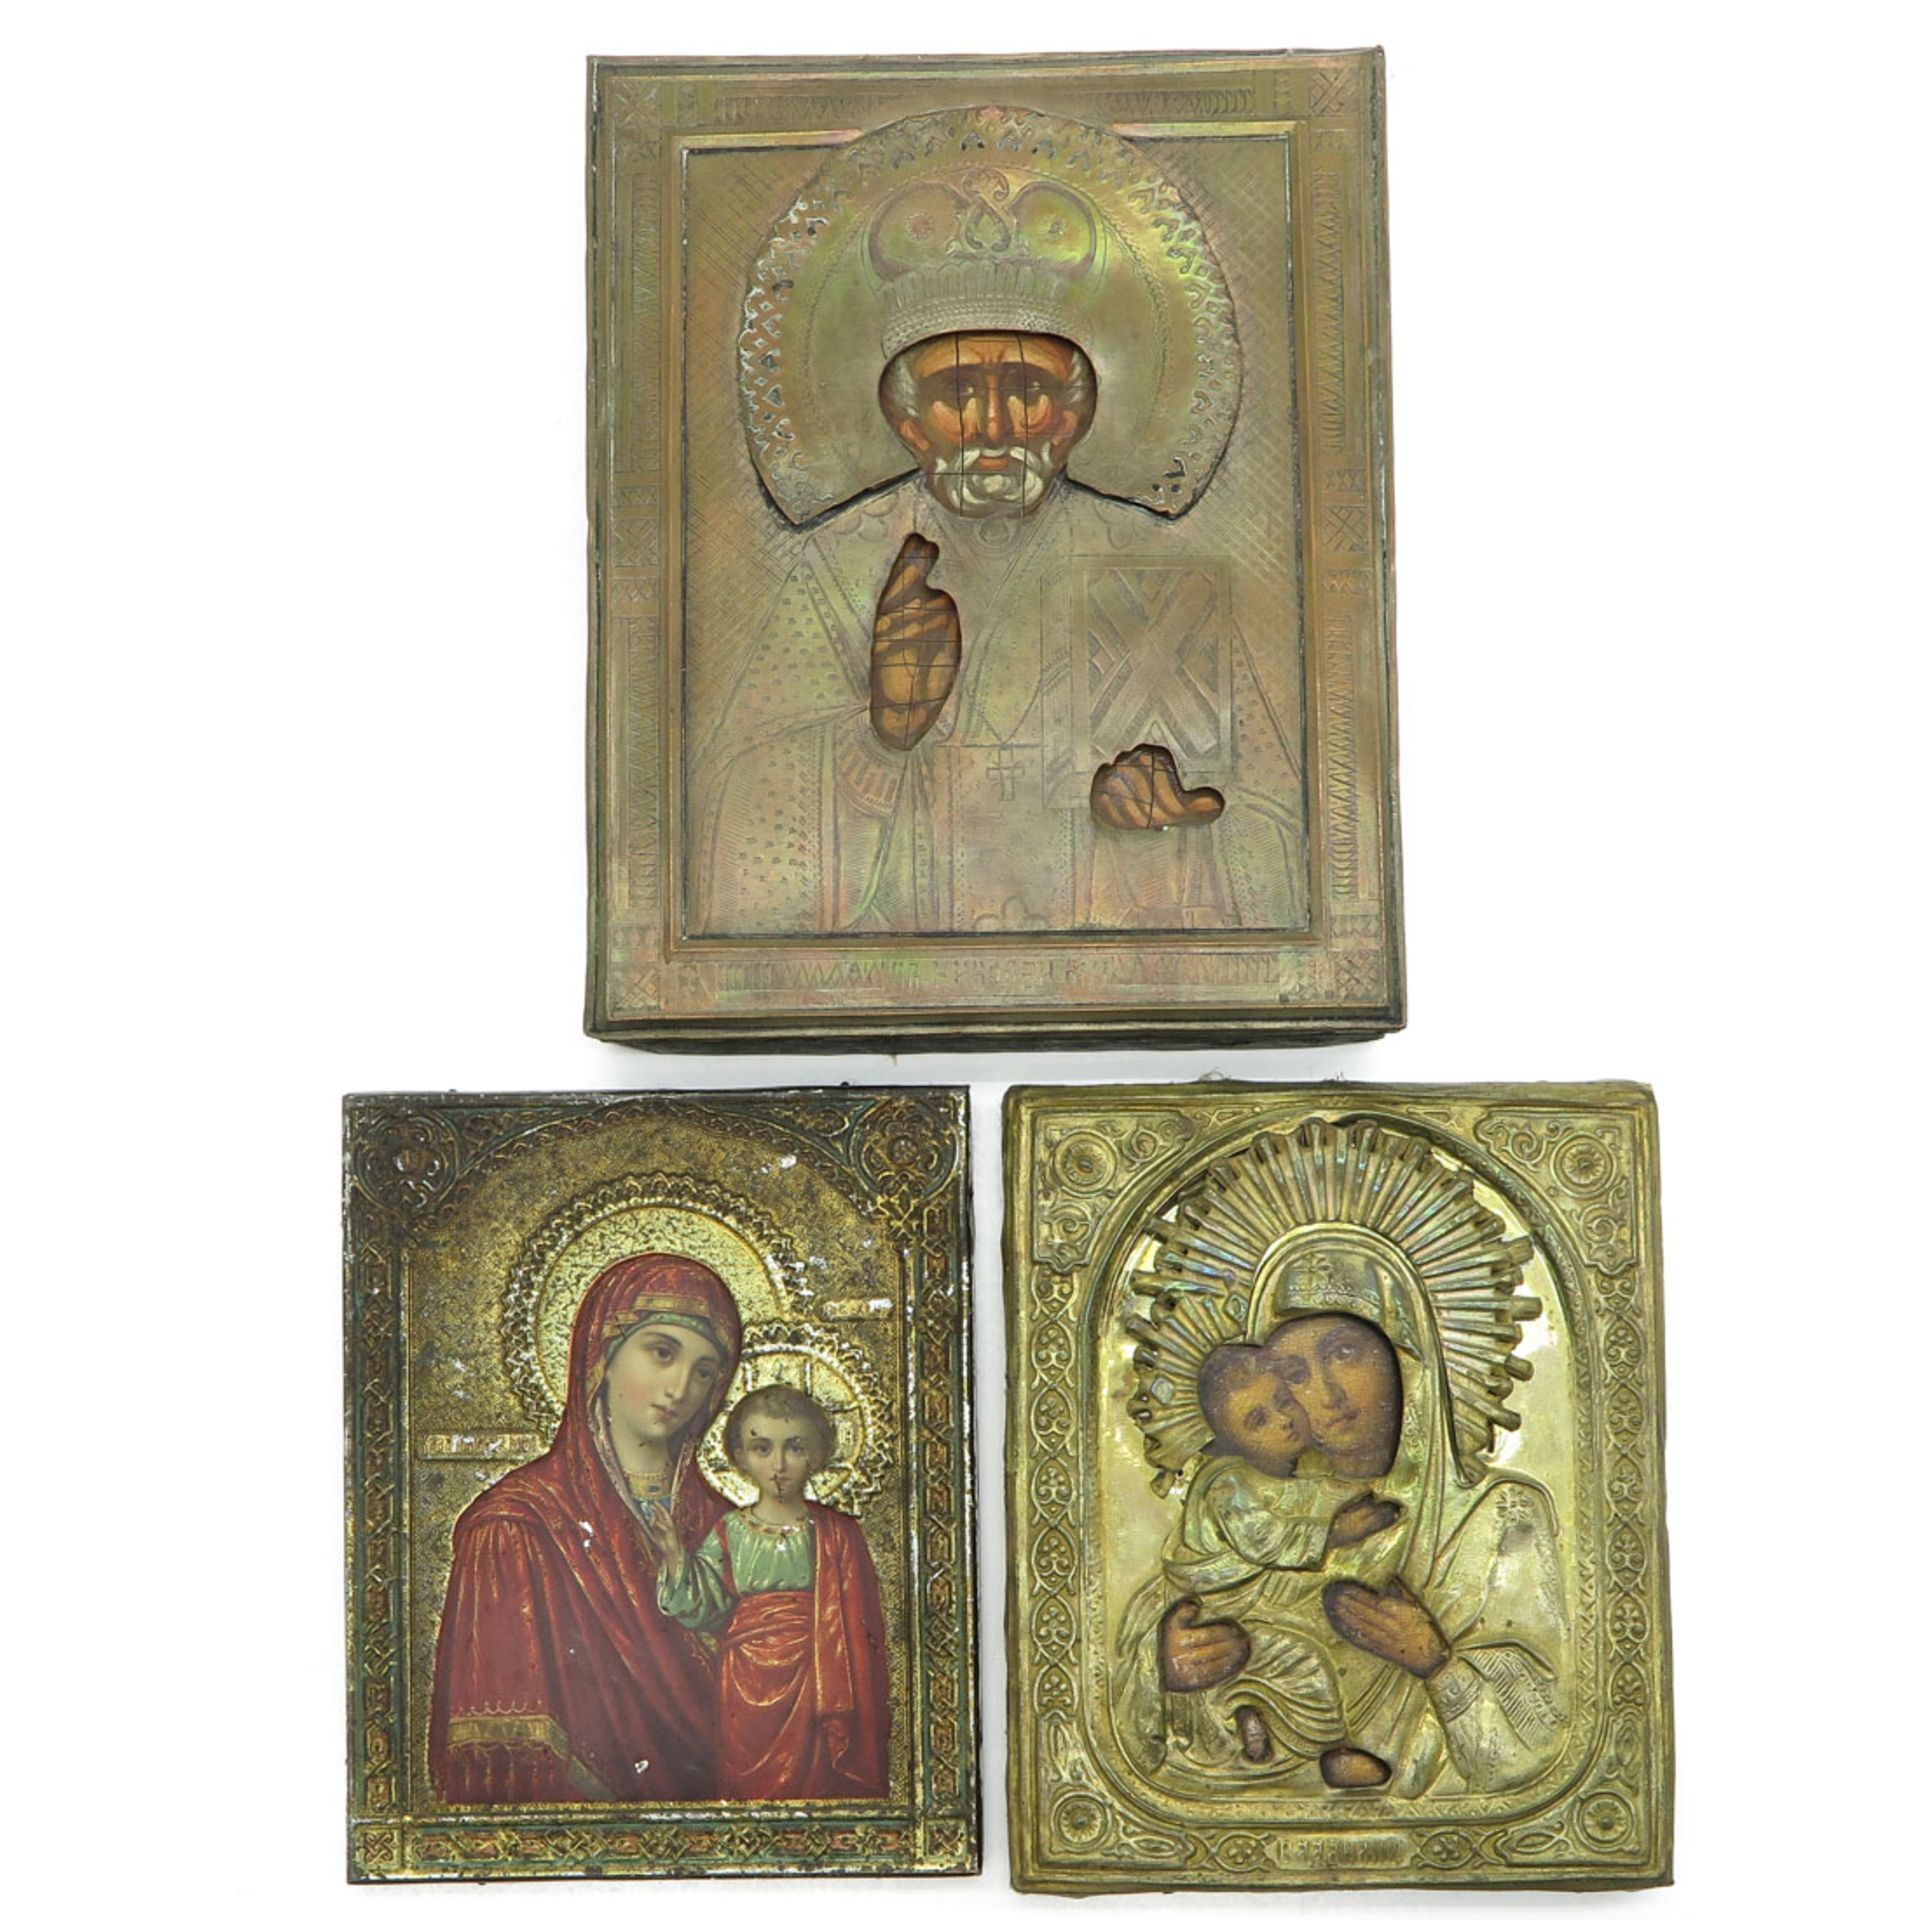 Lot of 3 Icons